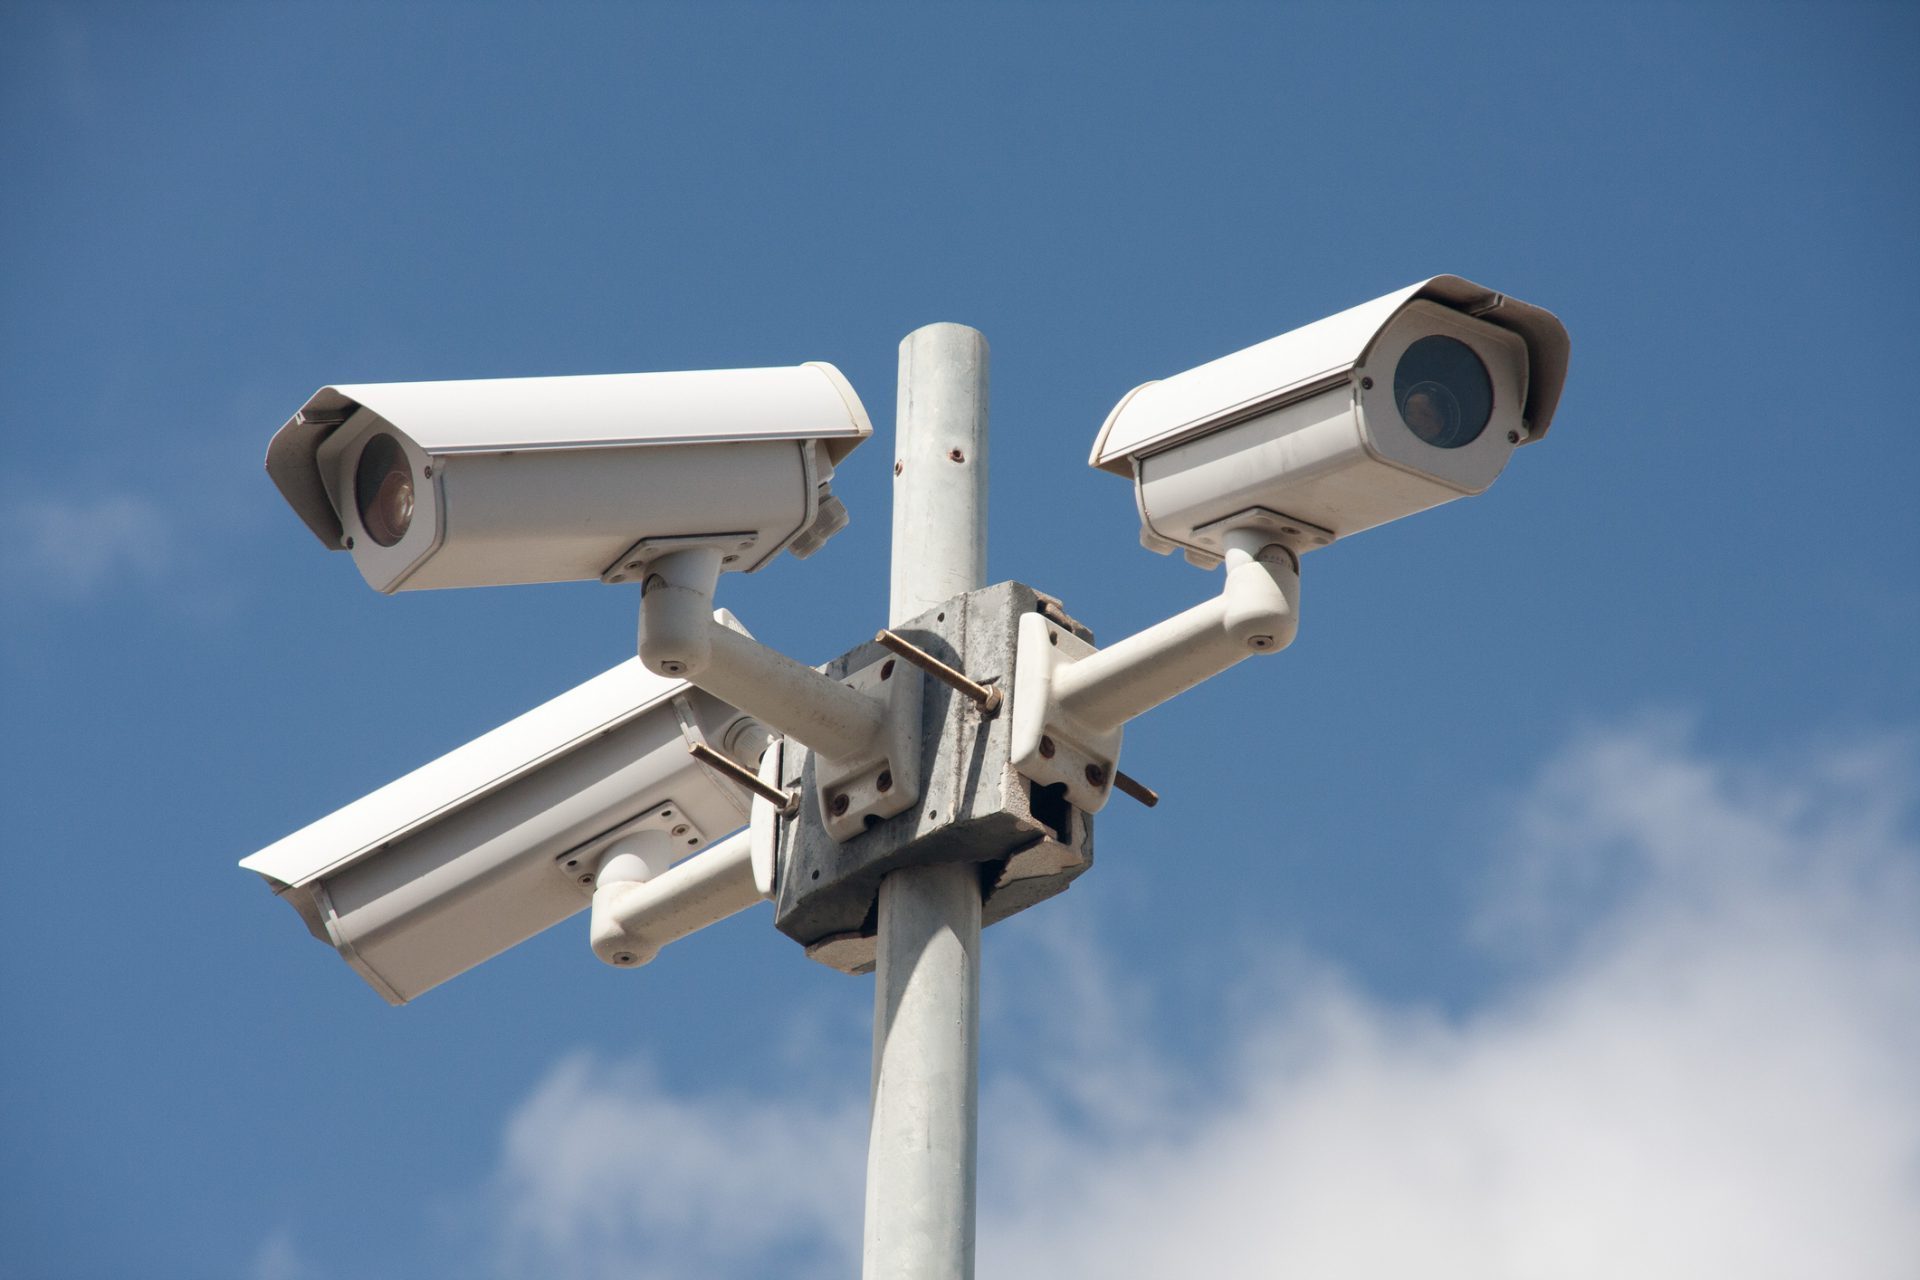 CCTV cameras have started biting are you still making noise?